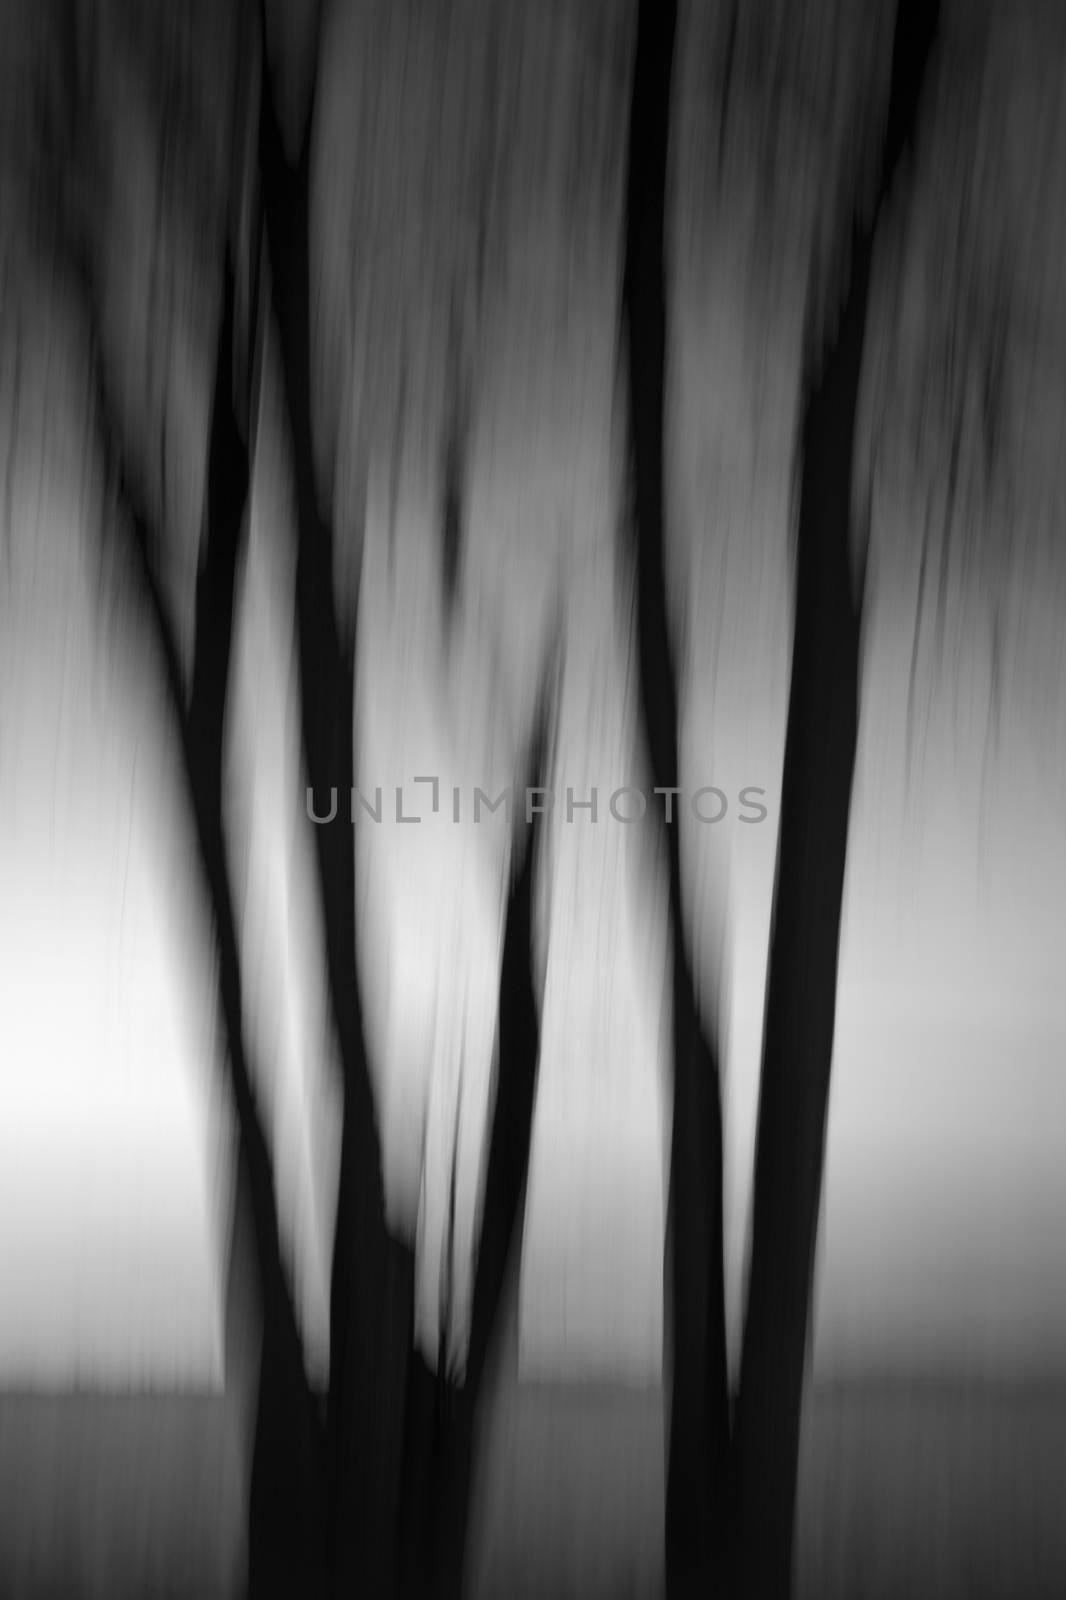 Abstract creative black and whitre image of trees in motion blur.